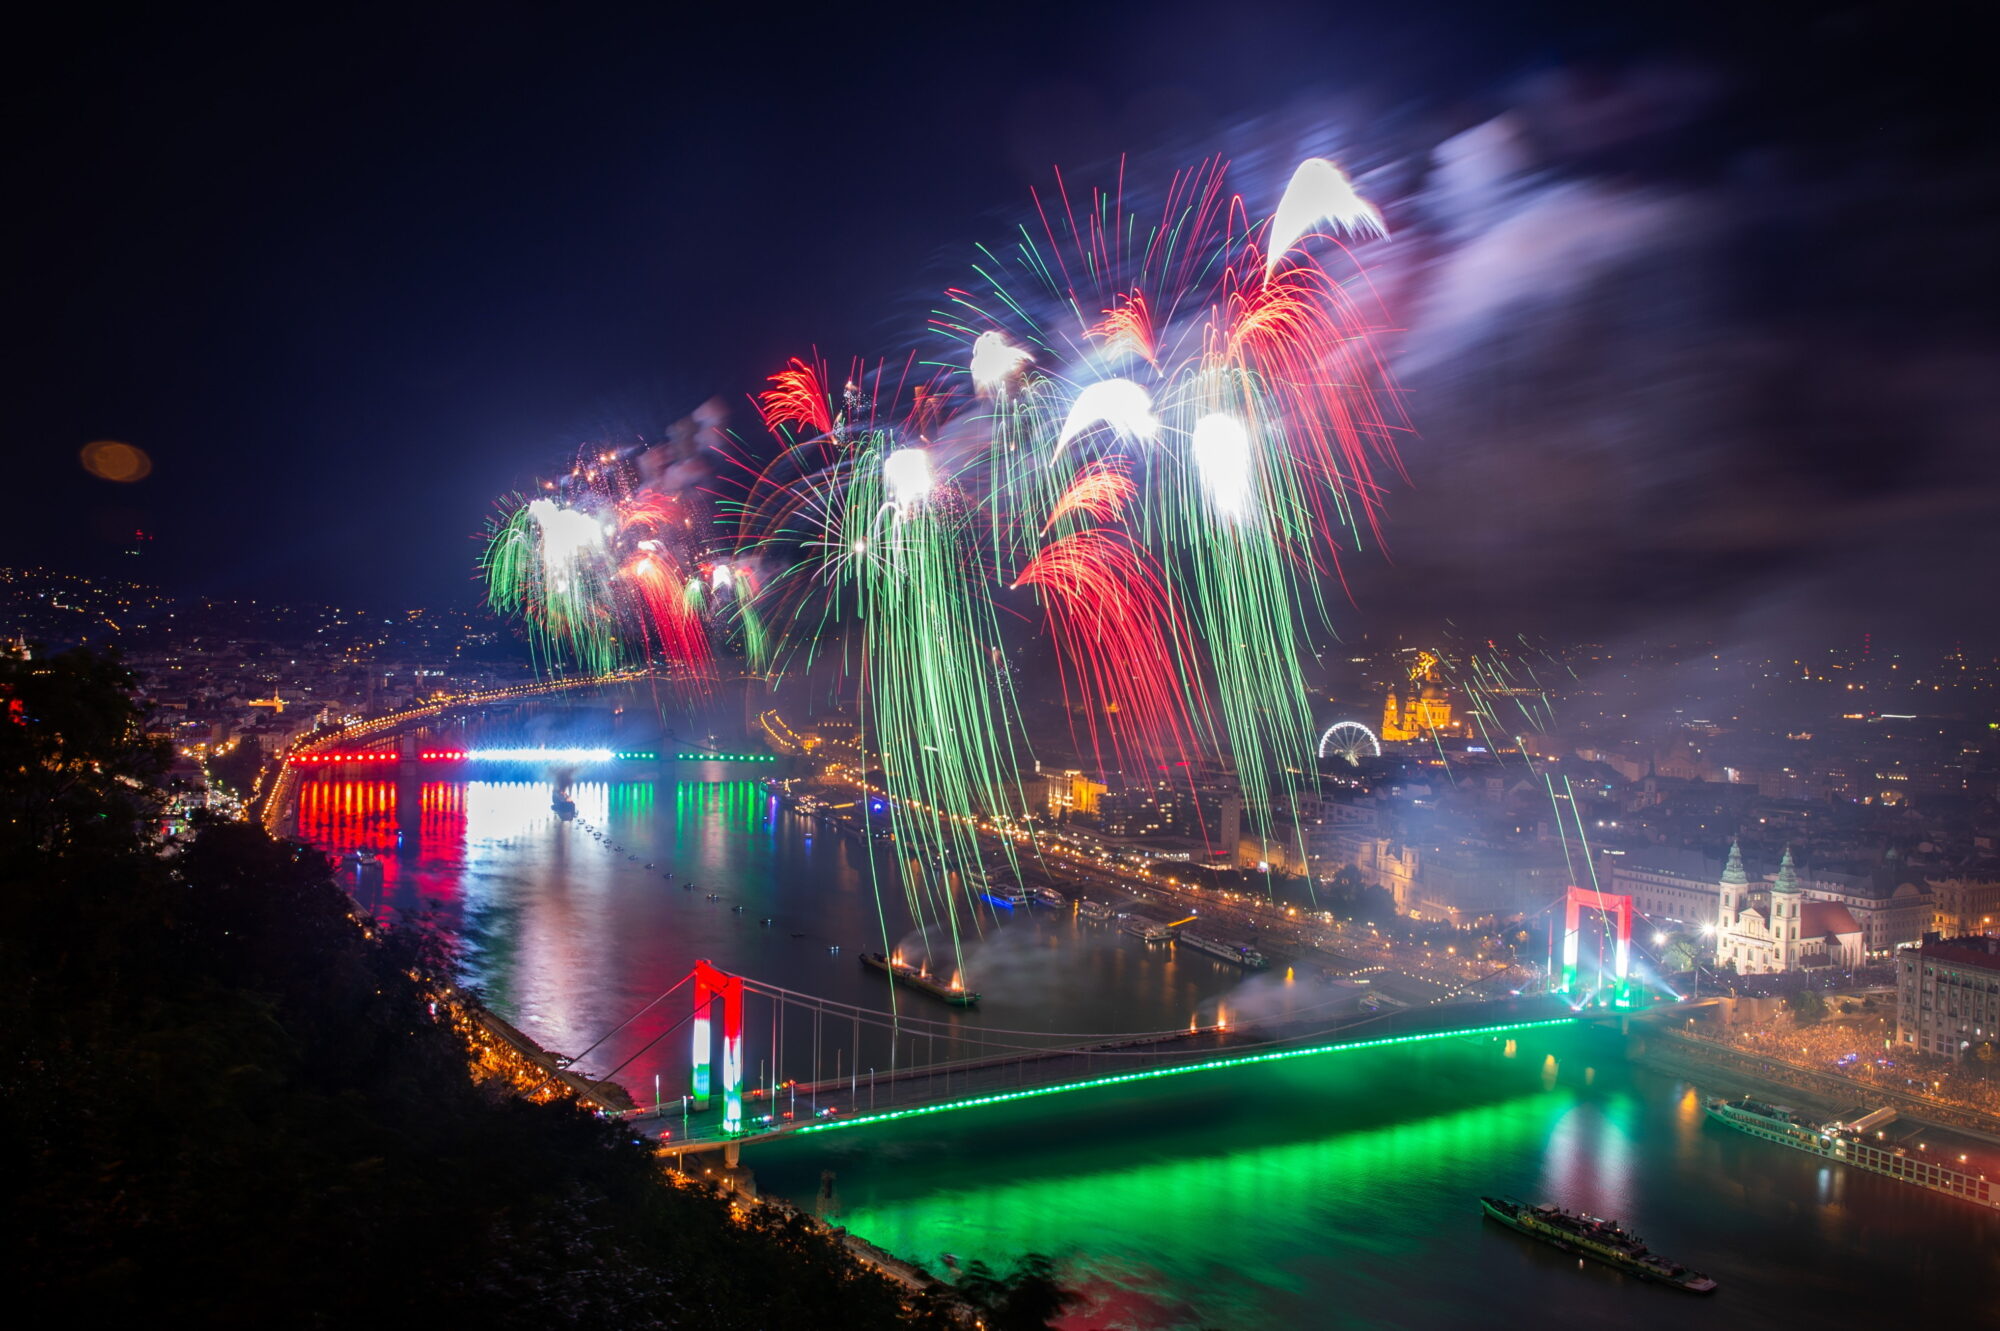 UP TO 4.5 MILLION HUNGARIANS MAY HAVE SEEN THE FIREWORKS IN BUDAPEST ON 20 AUGUST